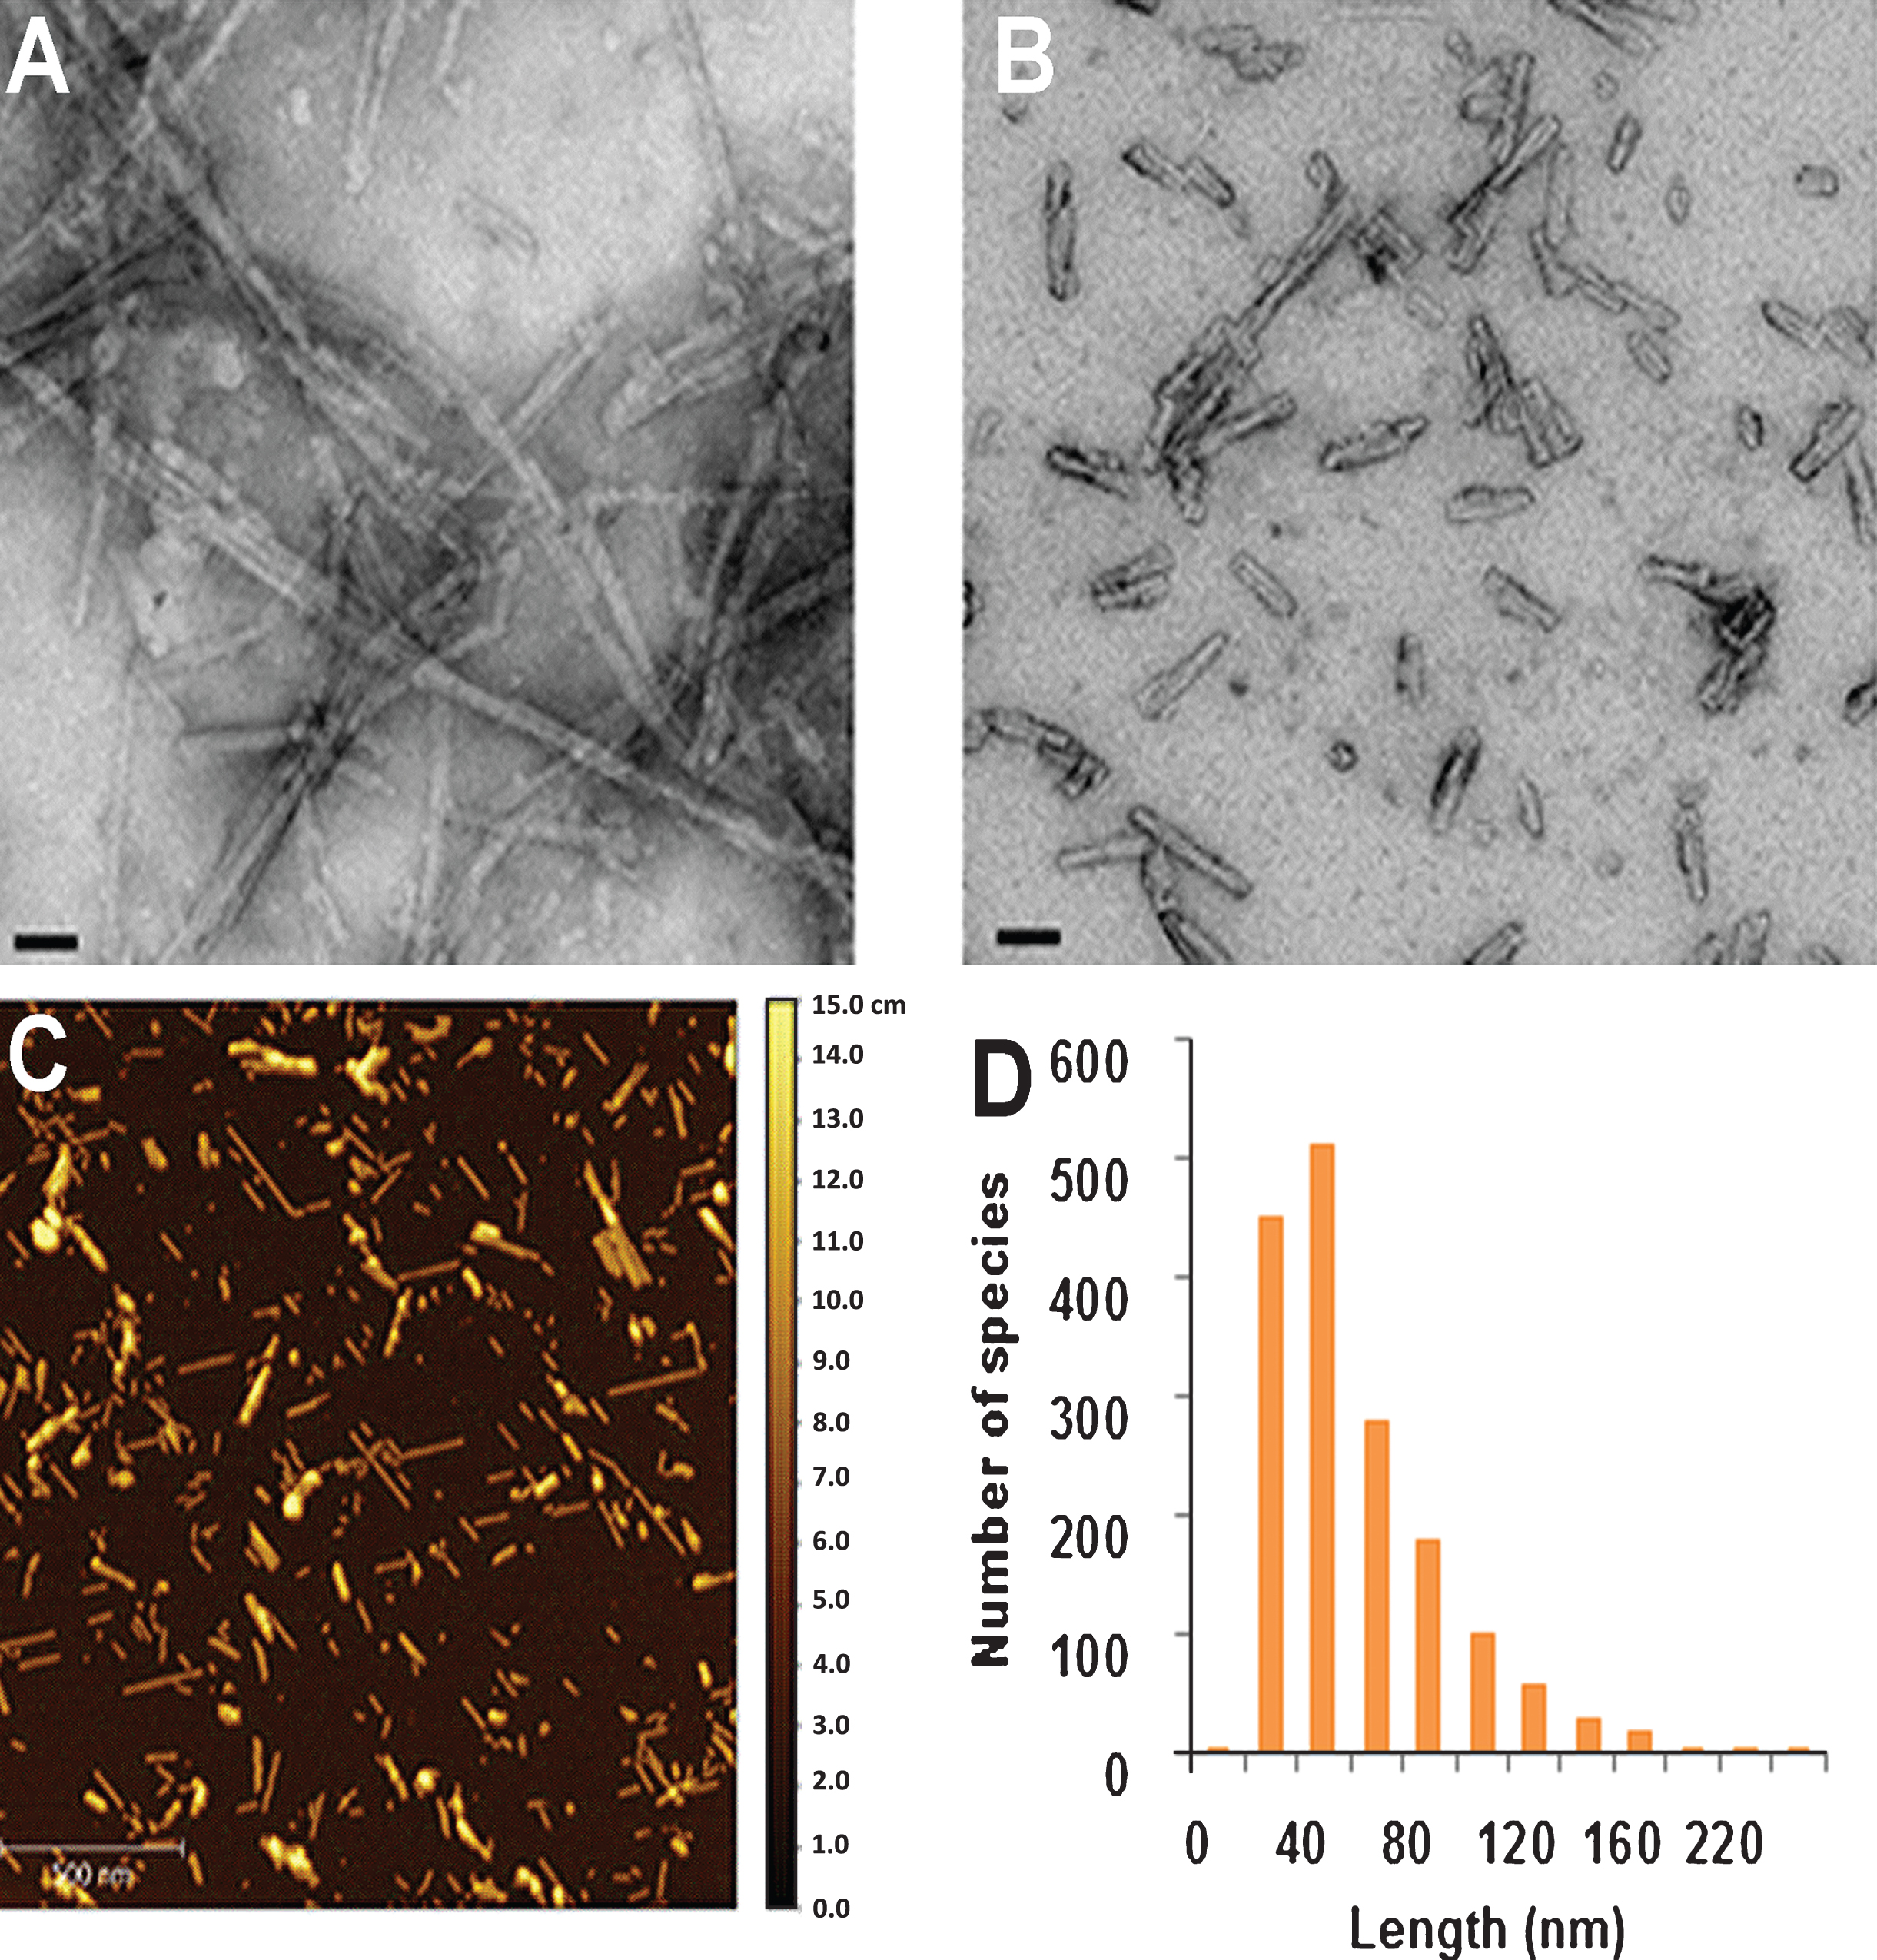 Analysis of the size and morphology of alpha-synuclein pre-formed fibrils (aSyn PFFs) after efficient sonication. A-B) Transmission electron microscopy (TEM) images of aSyn PFFs (A) pre-sonication and (B) post-sonication. A) aSyn PFFs pre-sonication are long fibrils with beta-sheet structure. Scale bars = 50 nm. B) aSyn PFFs that have been efficiently sonicated are short fibrils that keep the beta-sheet conformation. Scale bars = 50 nm. C) Atomic force microscopy (AFM) analysis of sonicated aSyn PFFs to determine size of the sonicated PFFs. D) Size distribution of the aSyn PFFs after sonication as determined by values obtained from statistical analysis of the aggregates identified in the atomic force microscopy images (C). aSyn, alpha-synuclein; PFF, pre-formed fibril.